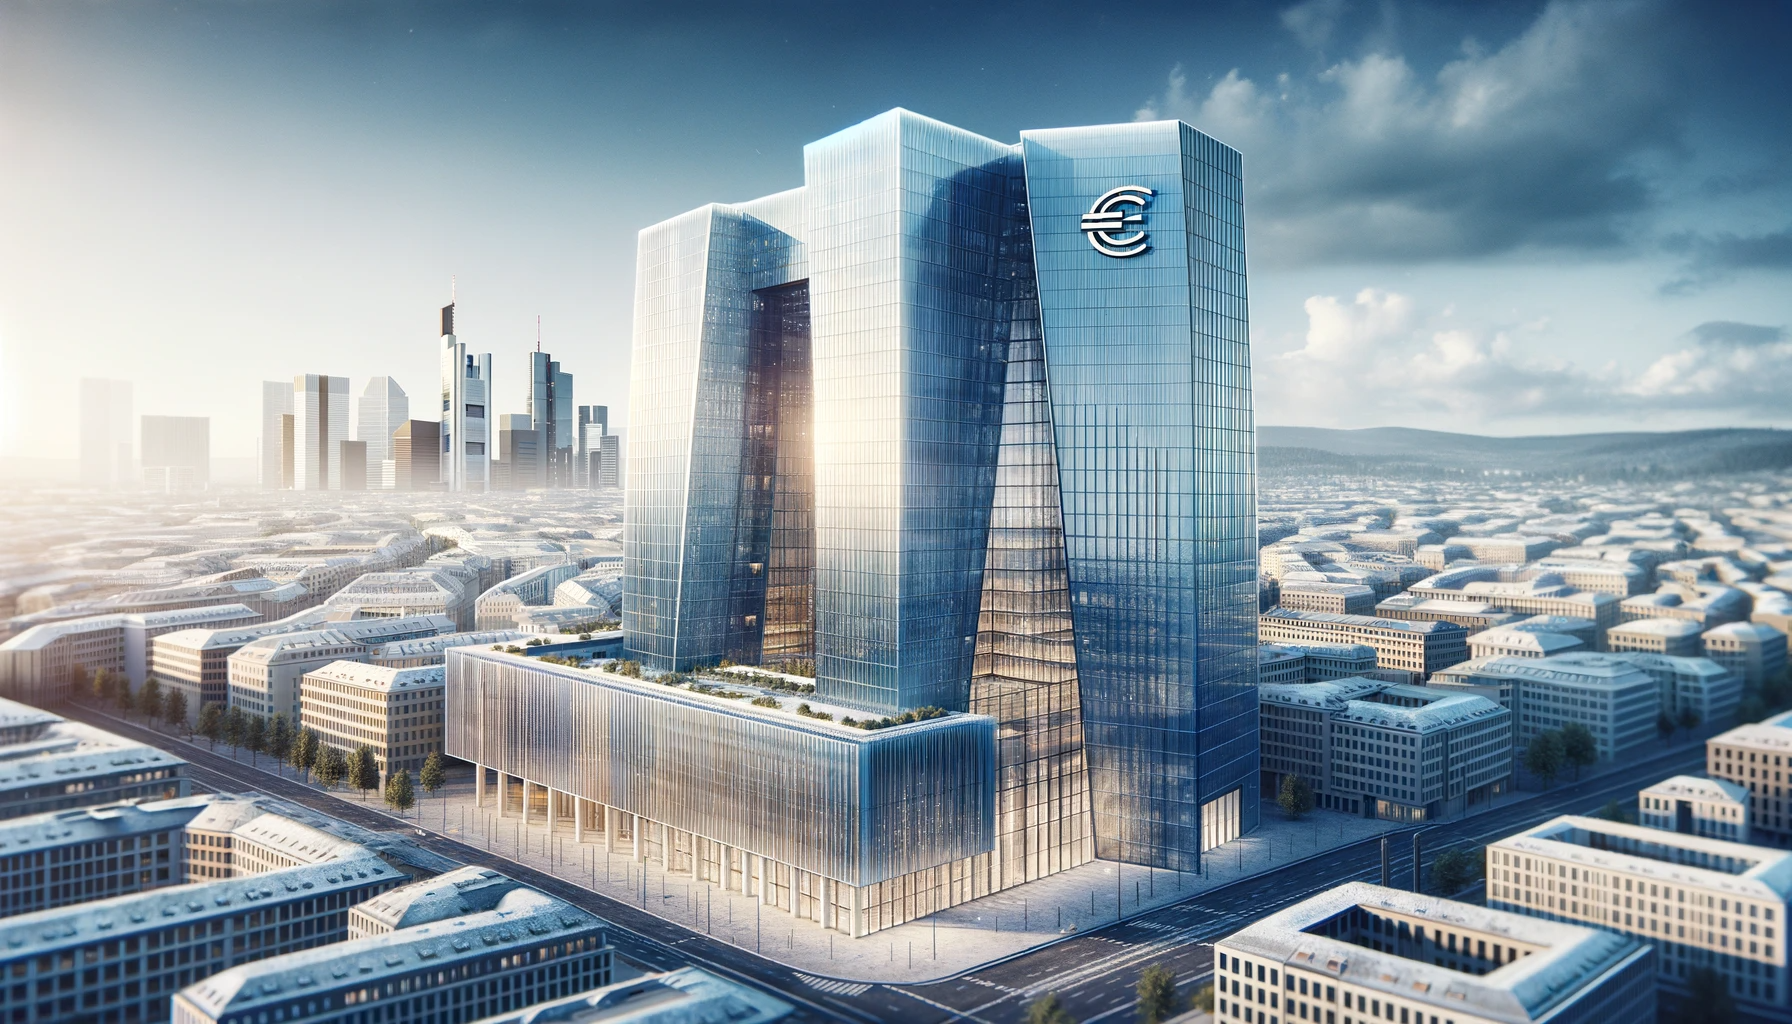 European Central Bank: Key Institution of the European Union - News